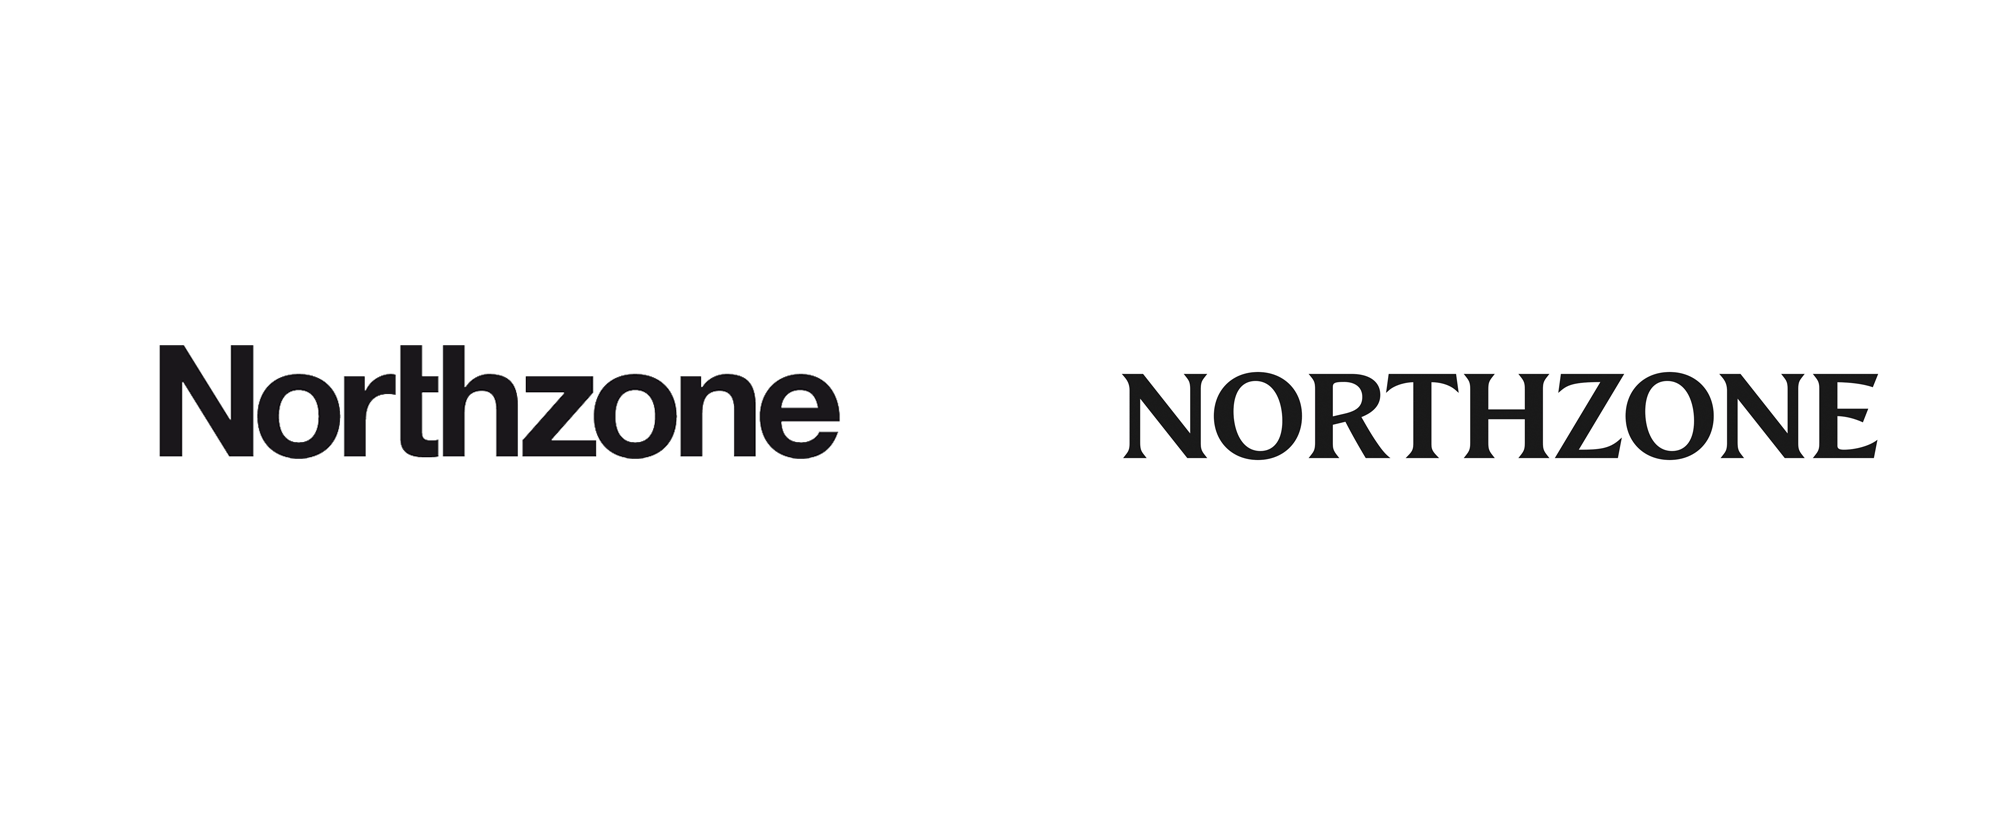 Noted New Logo and Identity for Northzone by Ragged Edge